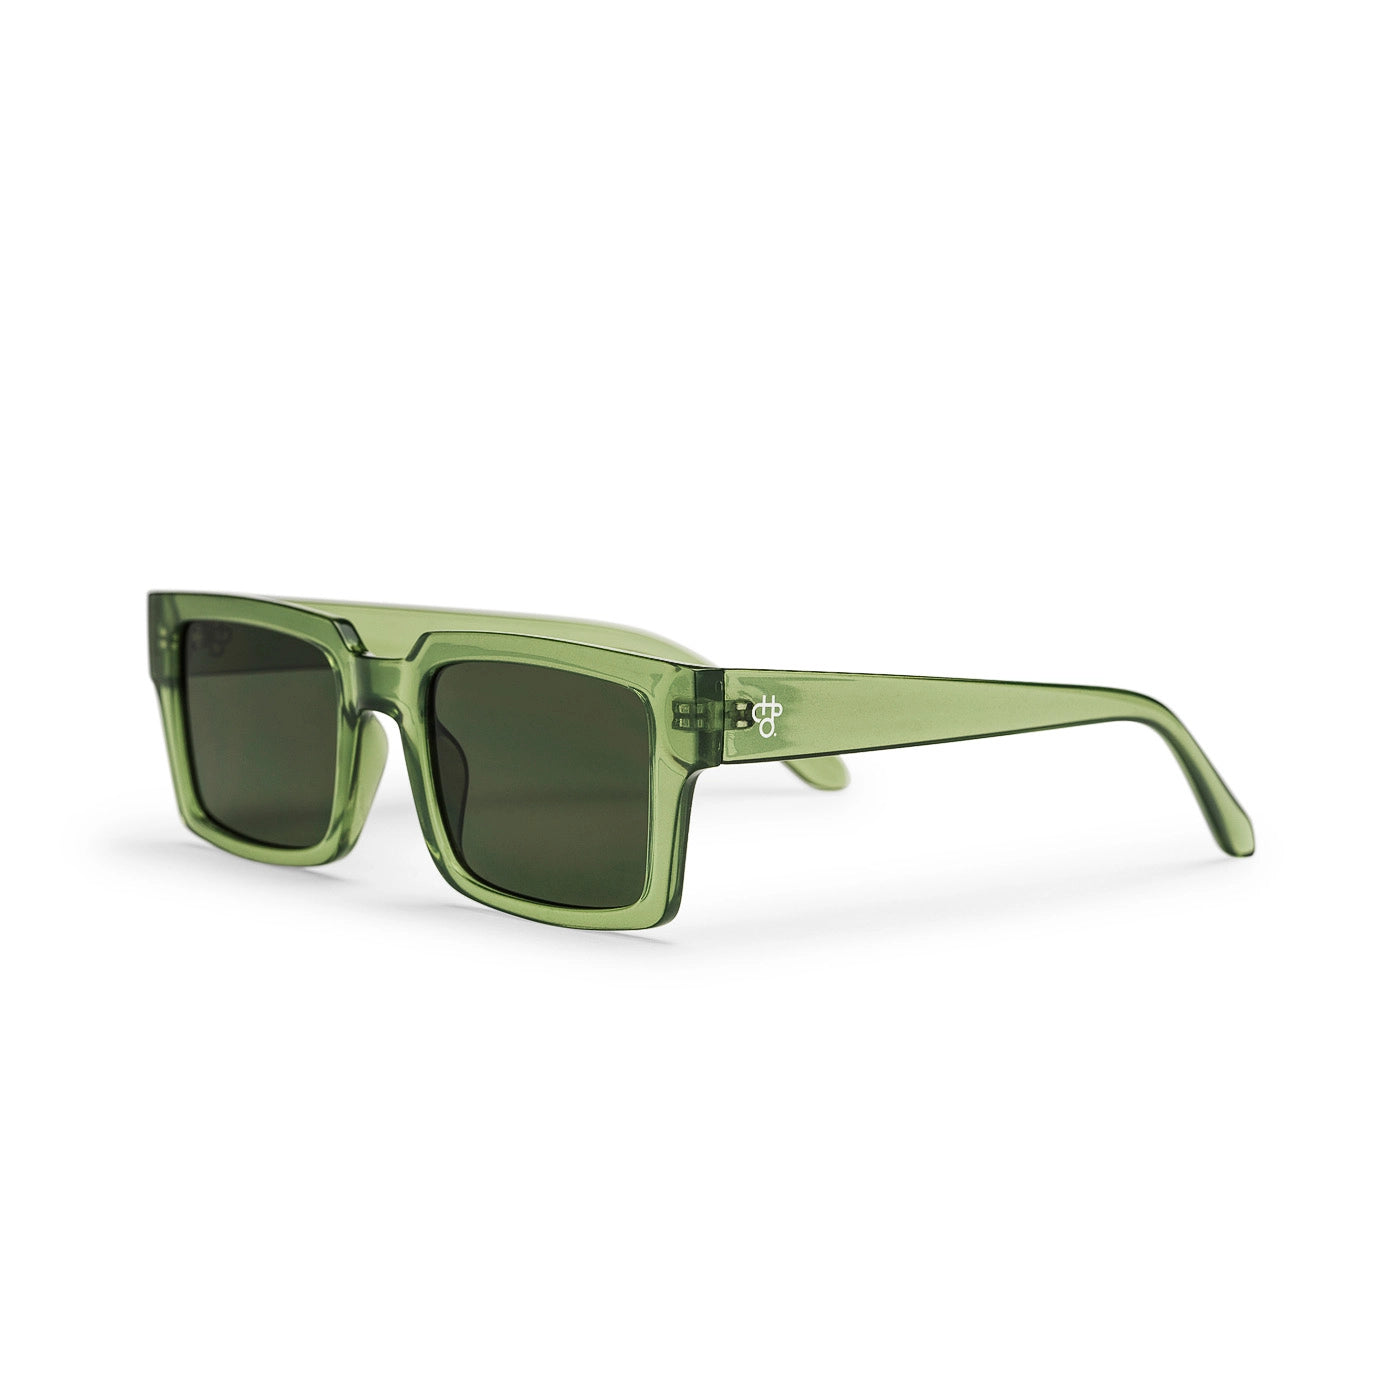 STELLAR RECYCLED SUNGLASSES: FOREST GREEN